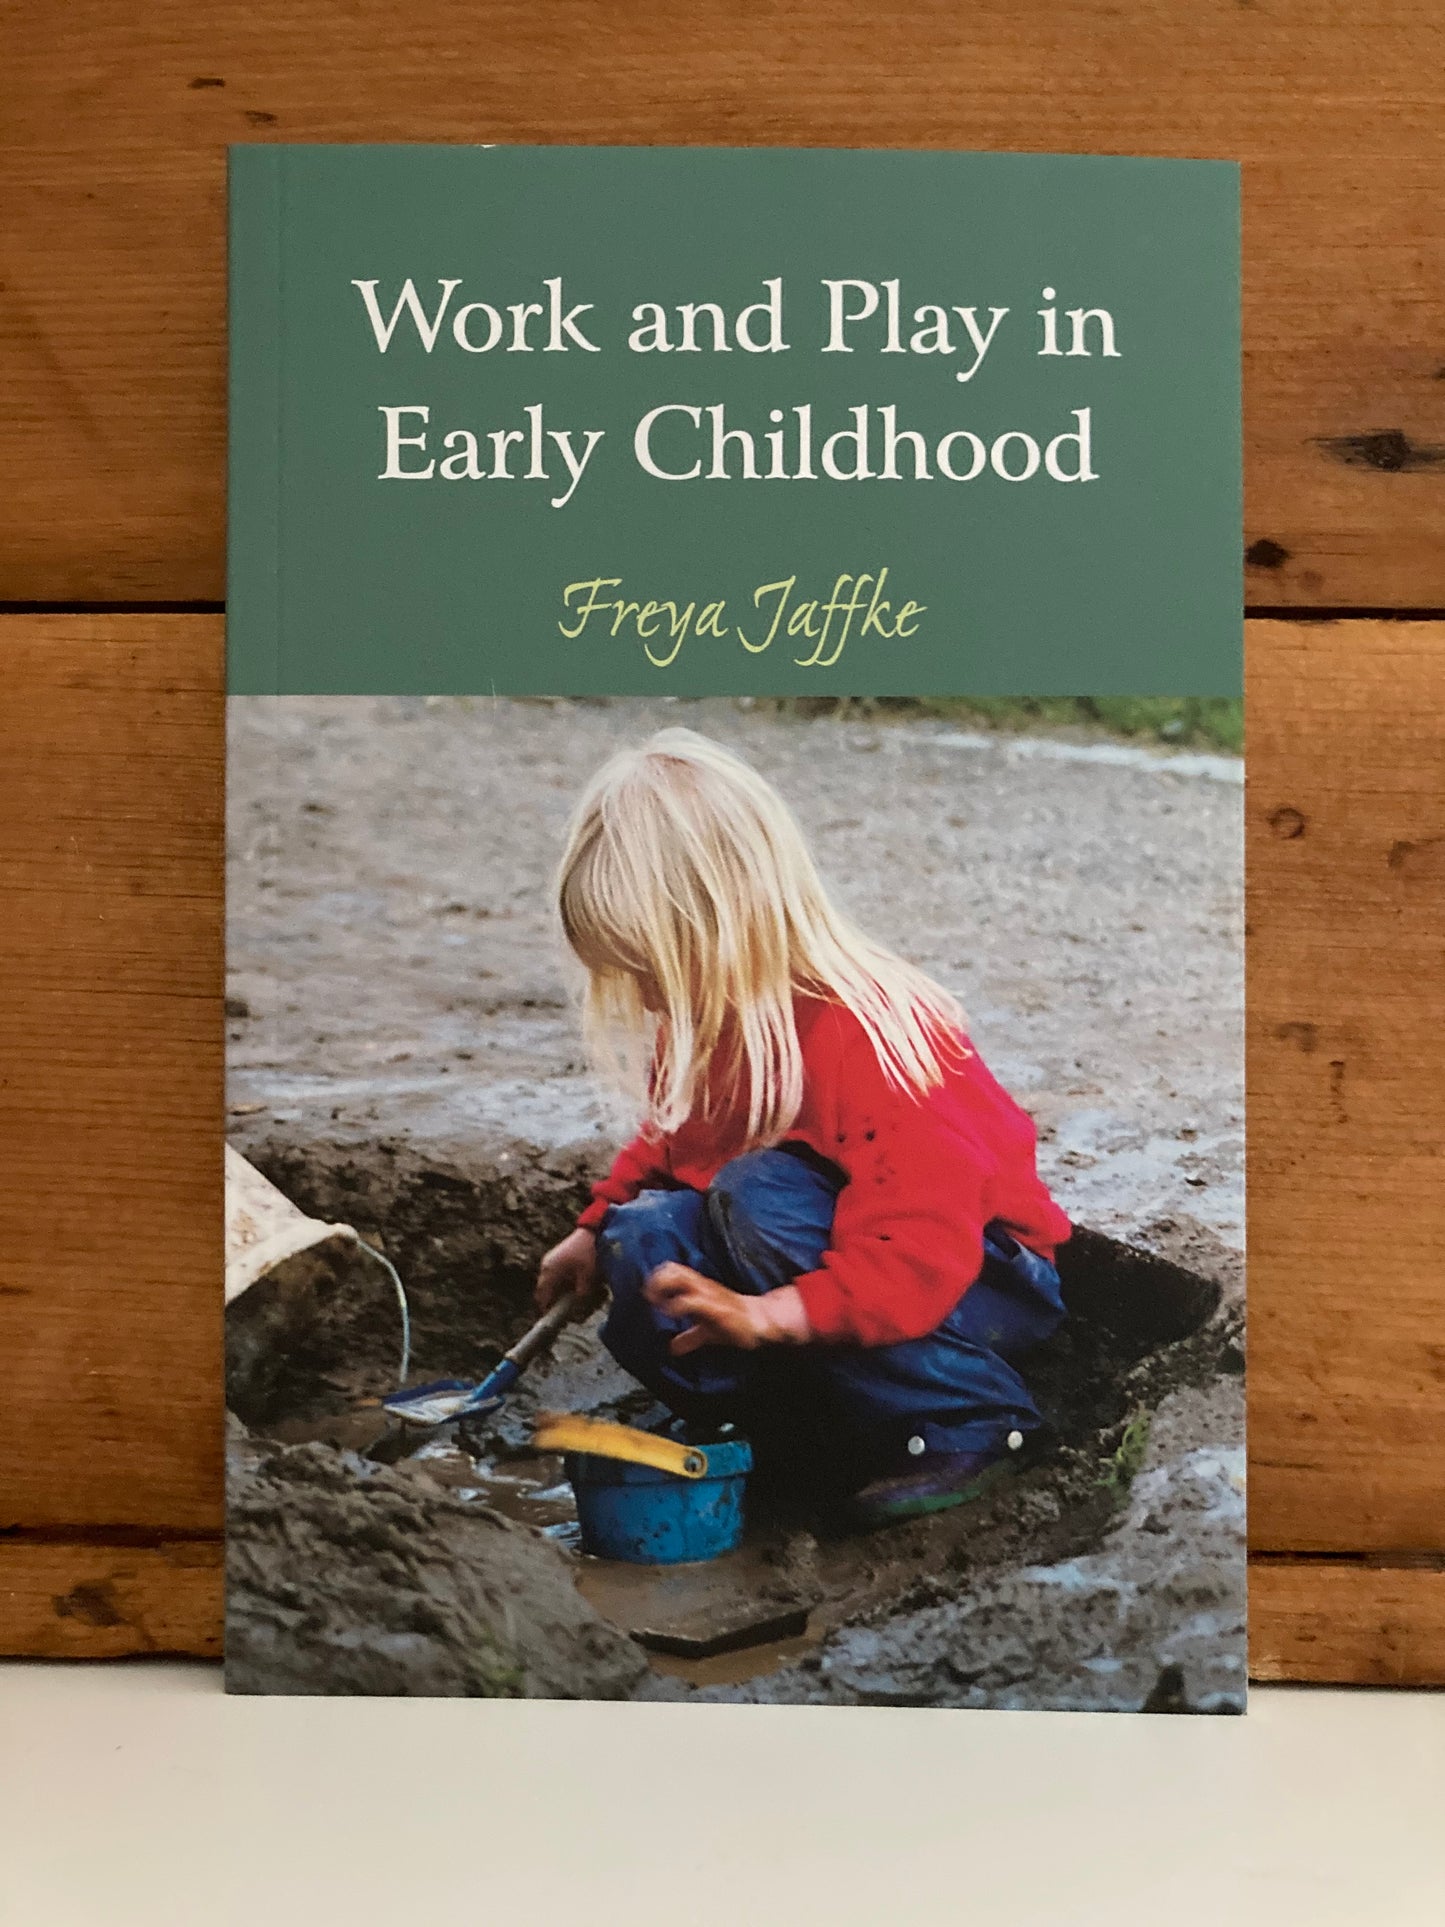 Parenting Resource Book - WORK and PLAY IN EARLY CHILDHOOD